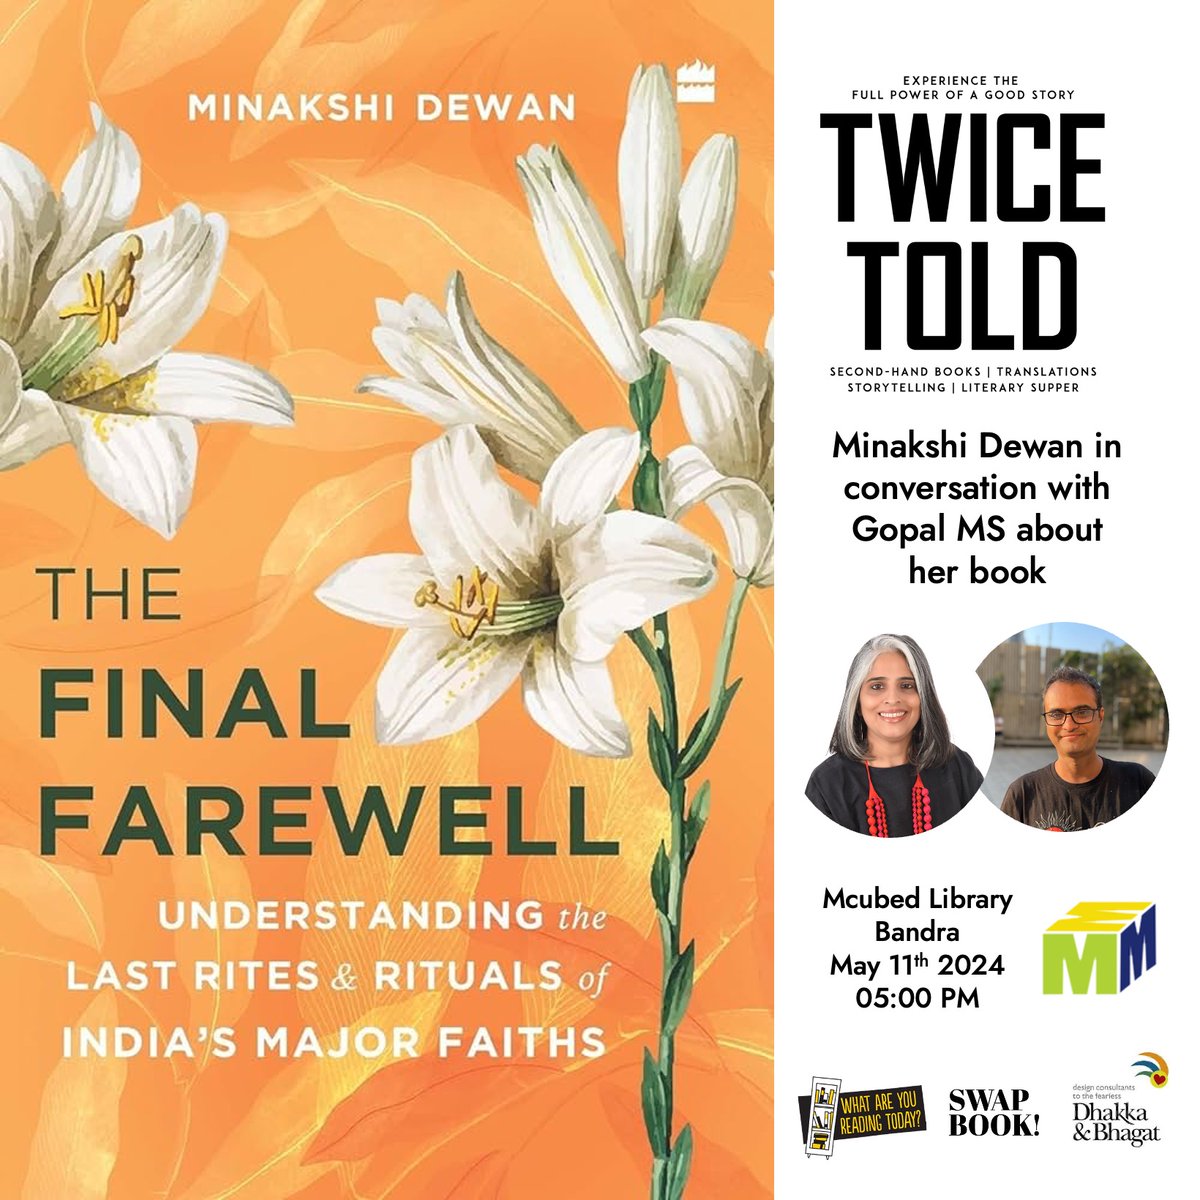 Friends in Mumbai, super delighted to be doing a book talk on 11th May in Bandra at 5 pm. I will be in conversation with the amazing @SloganMurugan, Gopal MS. Please Join.
@HarperCollinsIN
Entry is free but please register.
insider.in/twicetold-with…